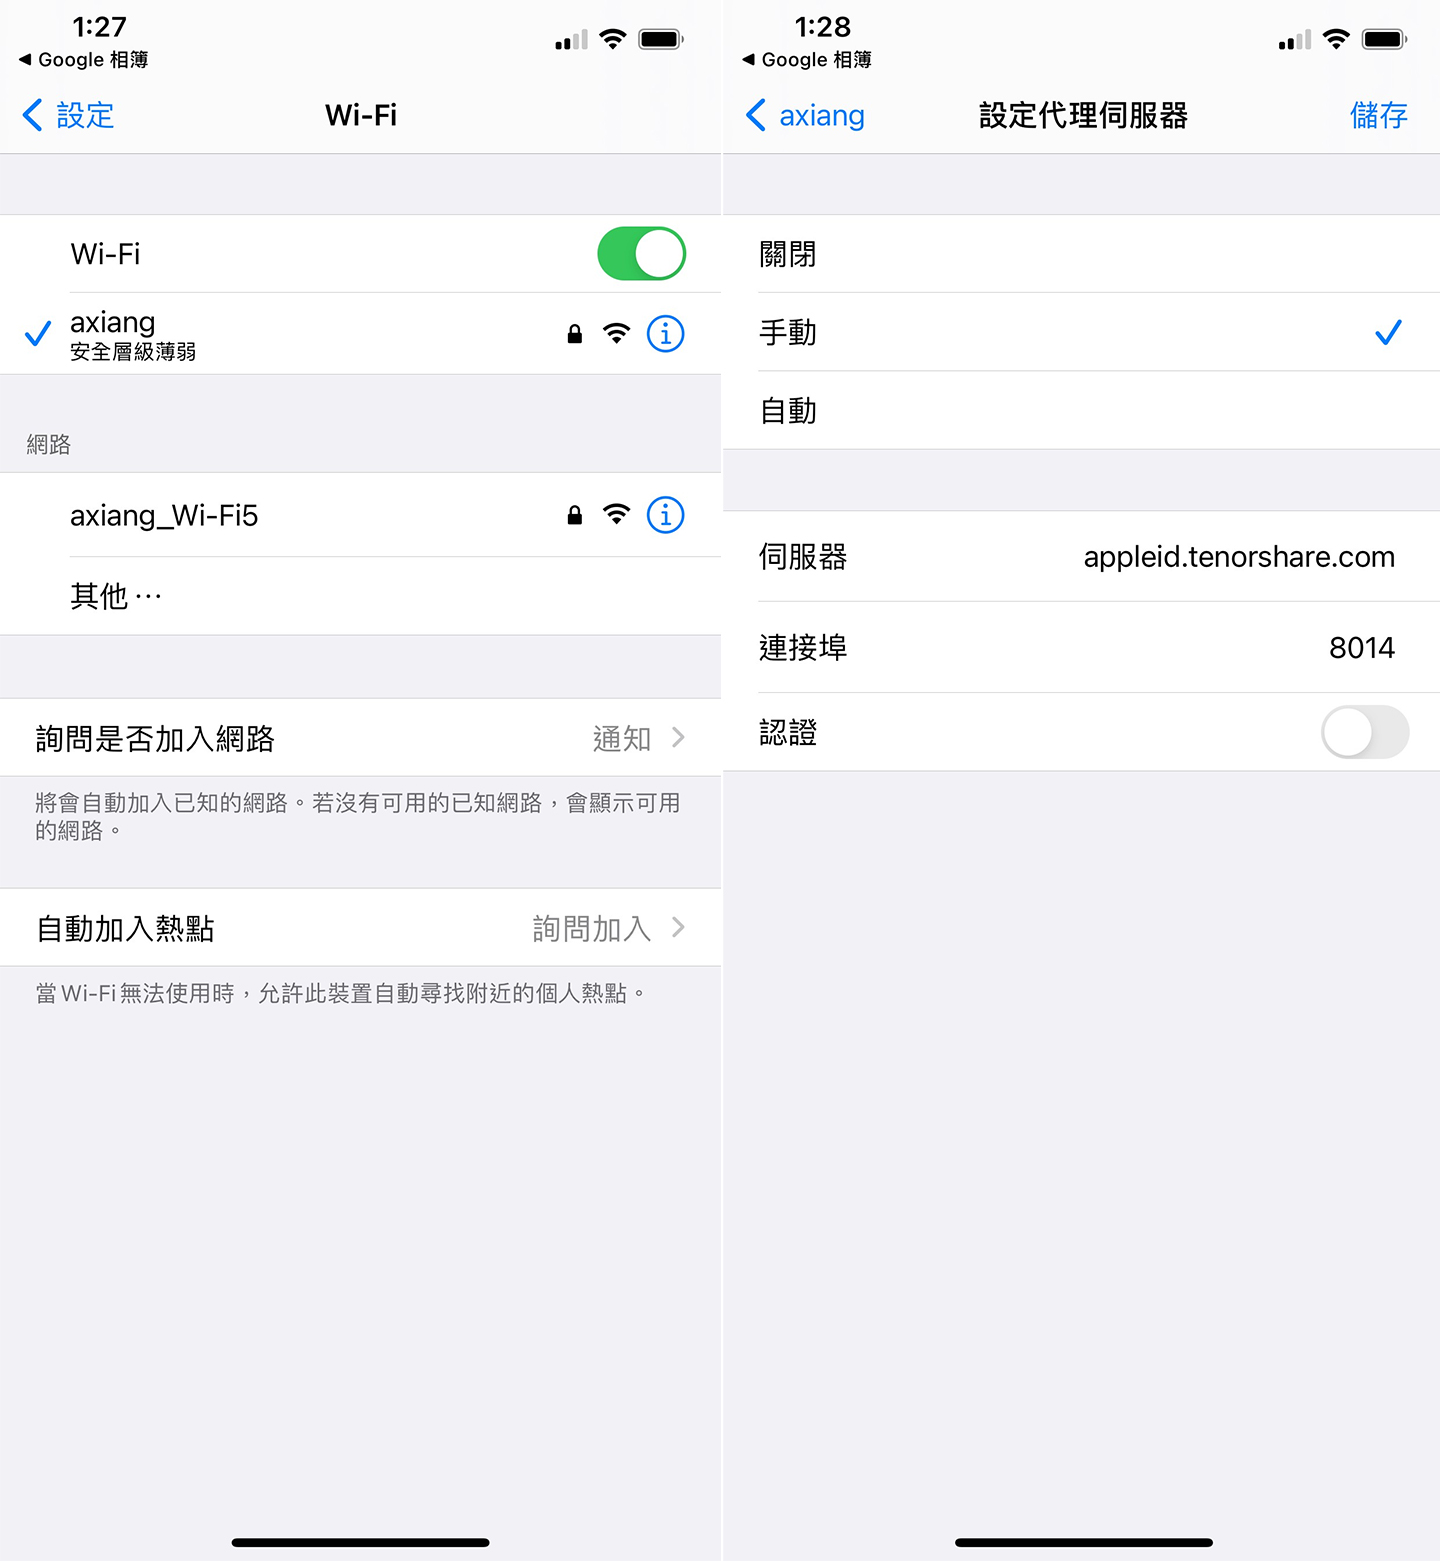 Next, we need to set up a proxy server in the connection to the network to bypass the original Apple ID service. The mobile phone needs to be connected to Wi-Fi instead of the mobile network. At this time, check the Wi-Fi you have connected to in the settings. SSID, and click the 